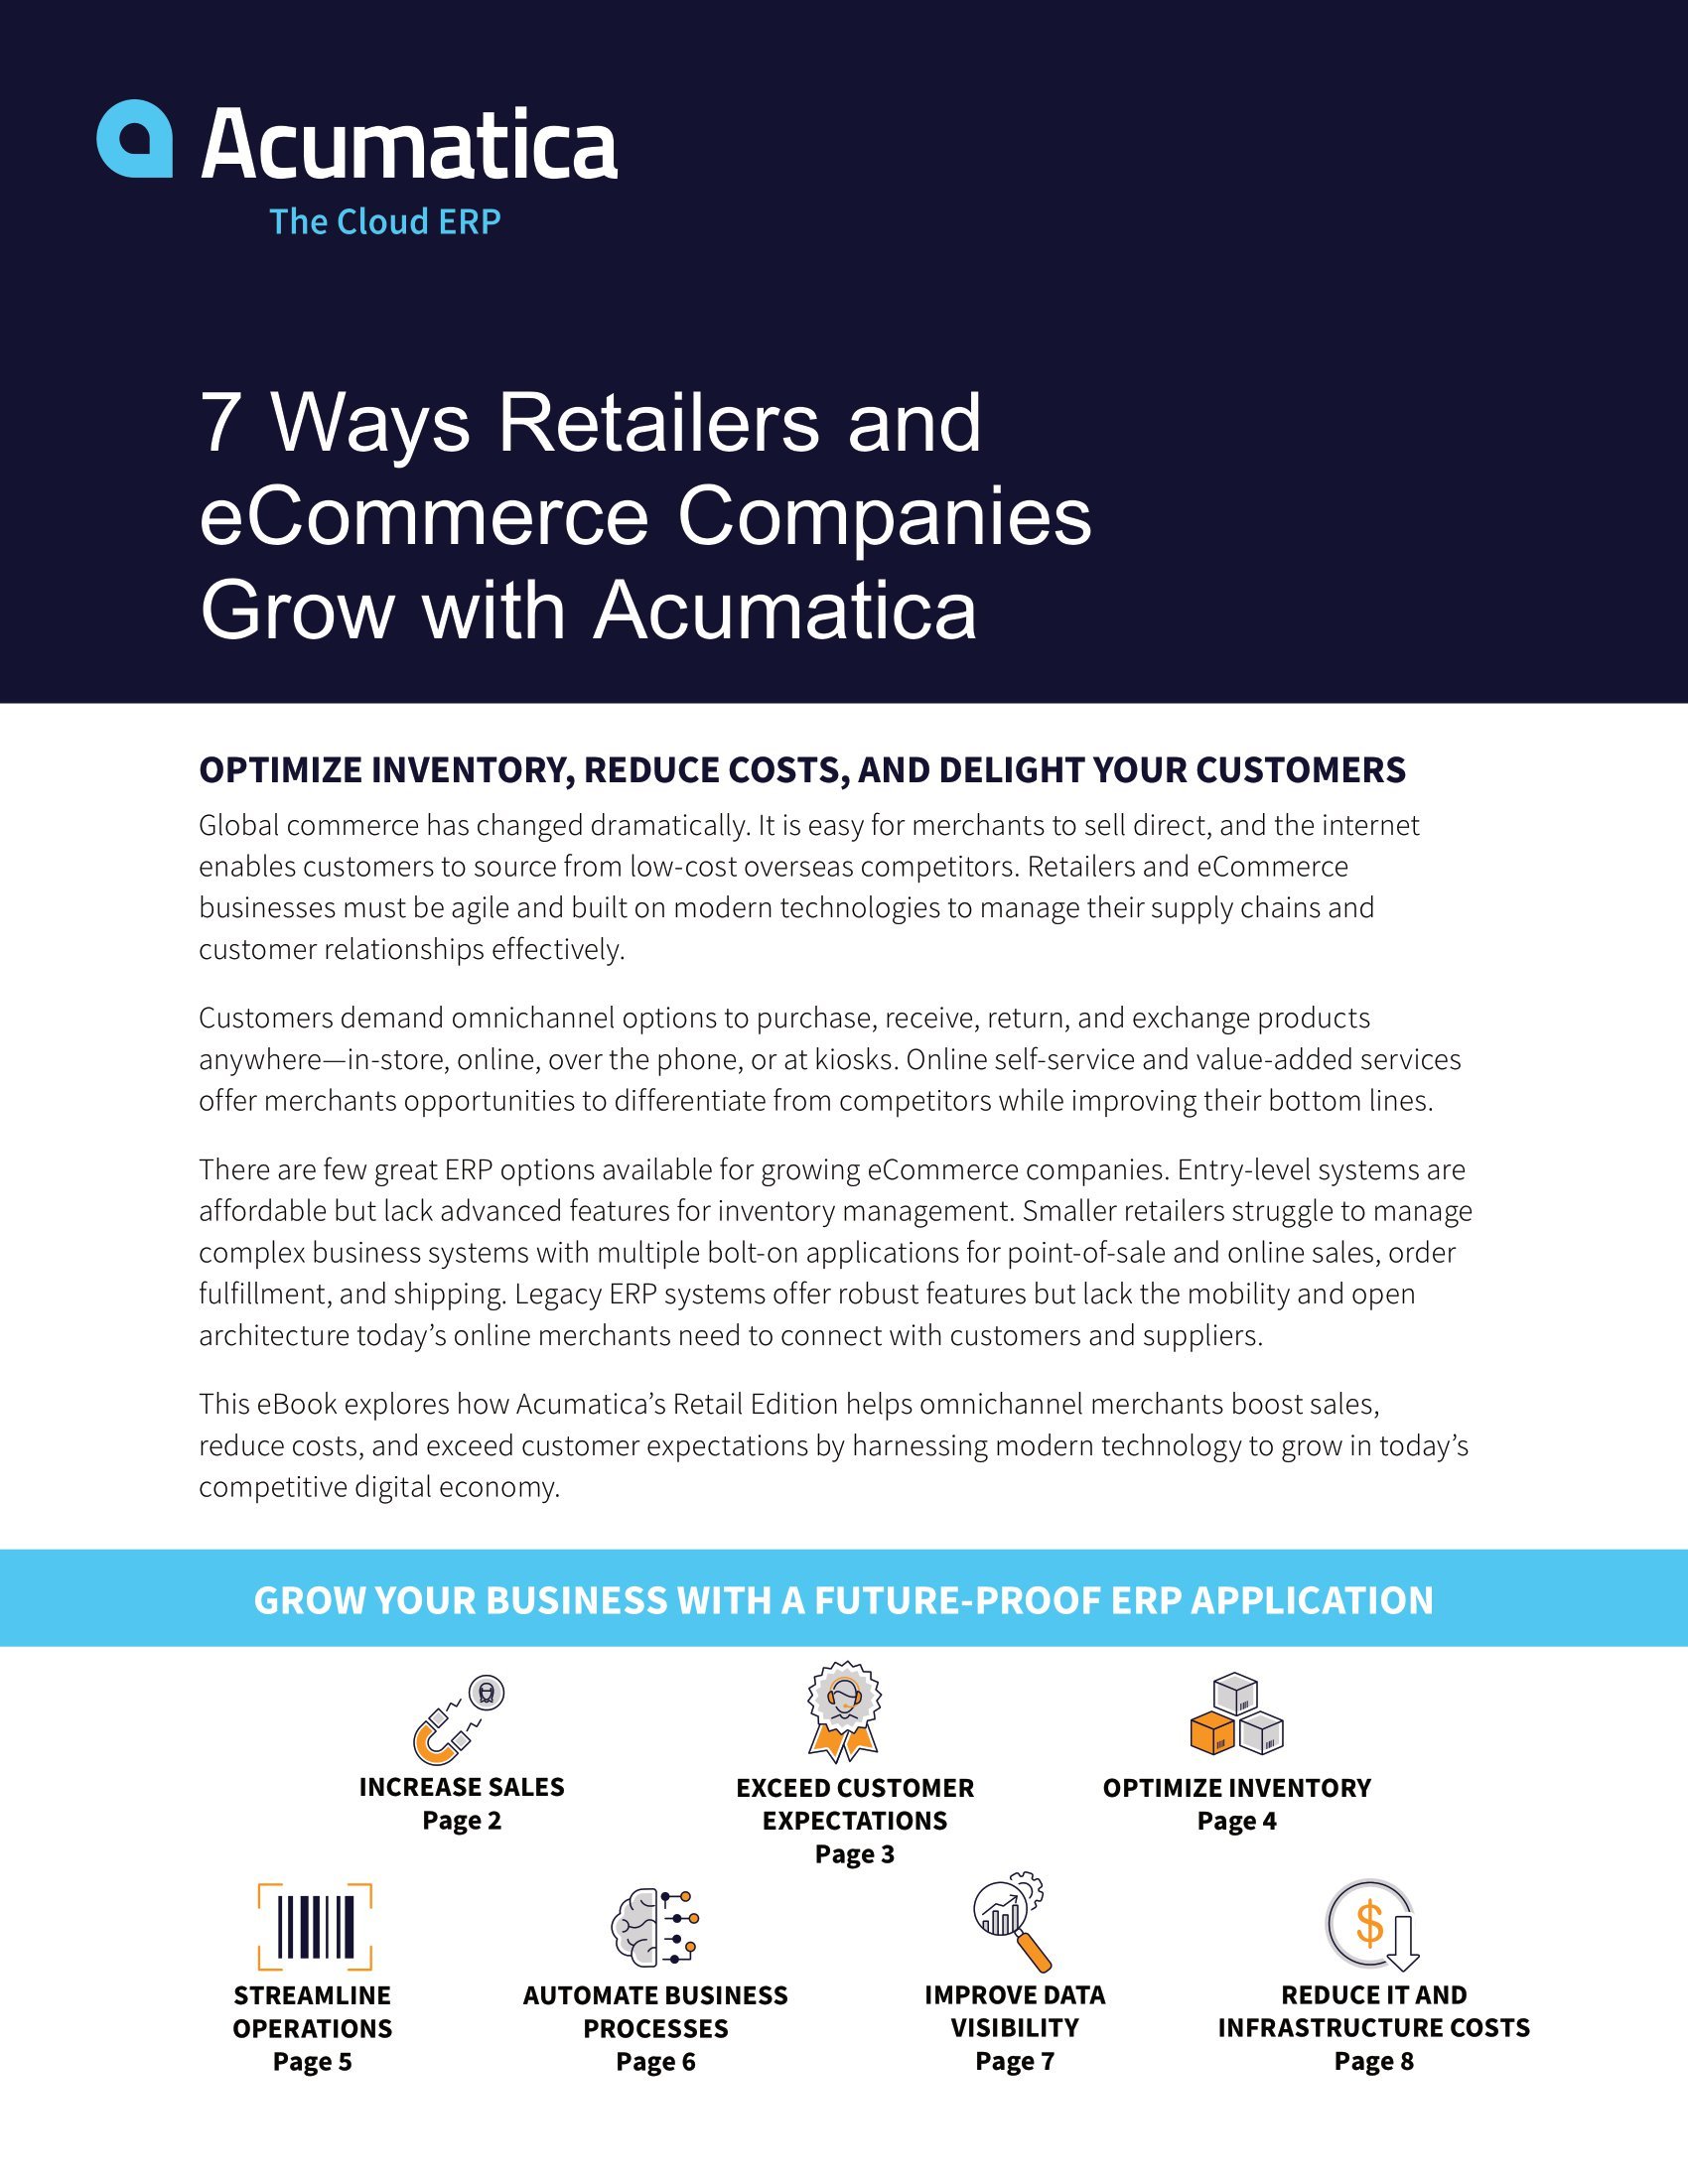 Retailers and eCommerce Companies Grow with Acumatica